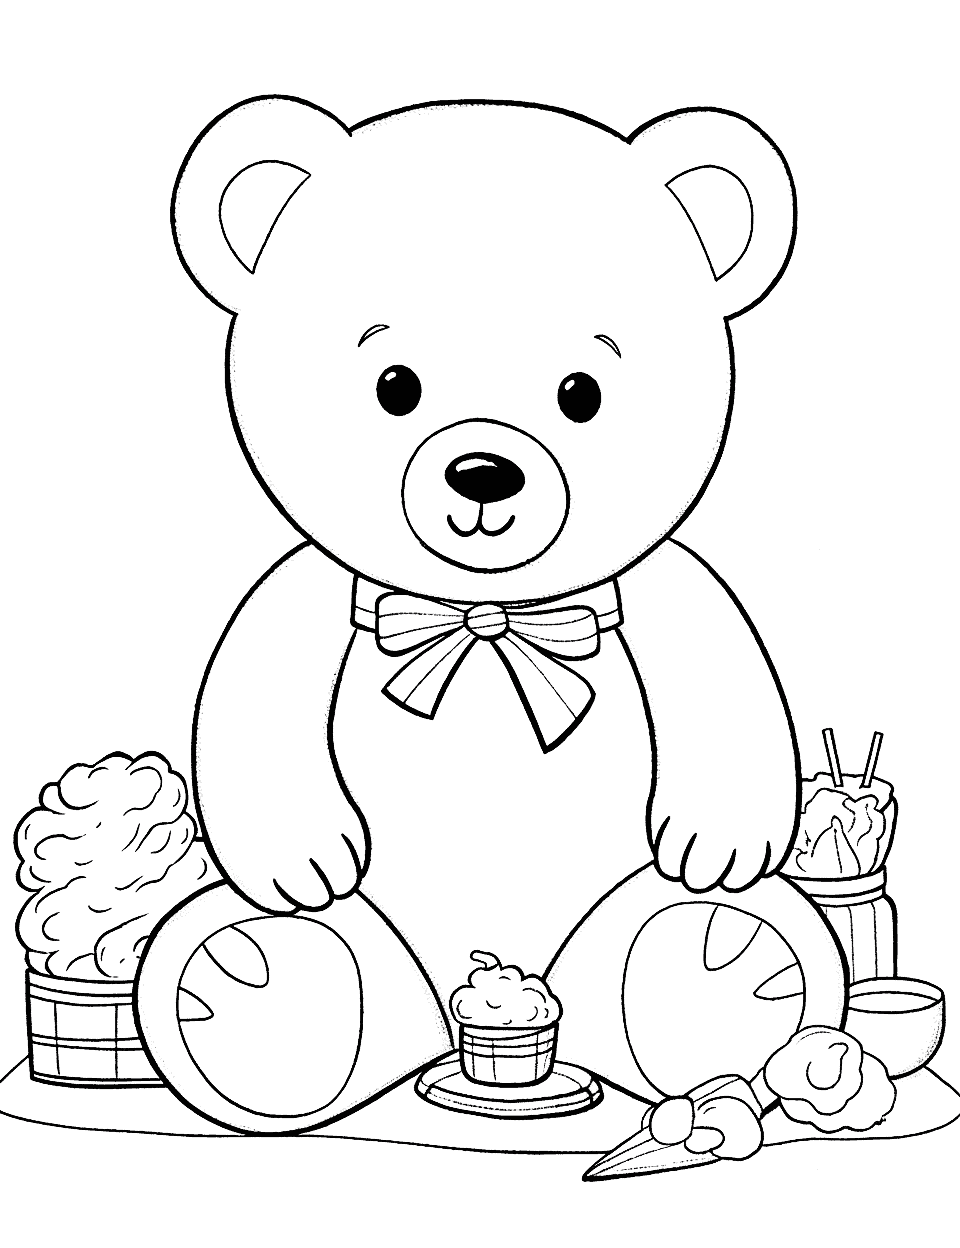 Teddy Bear Picnic Cute Coloring Page - Teddy bears sitting on a blanket, having a picnic with delicious treats.